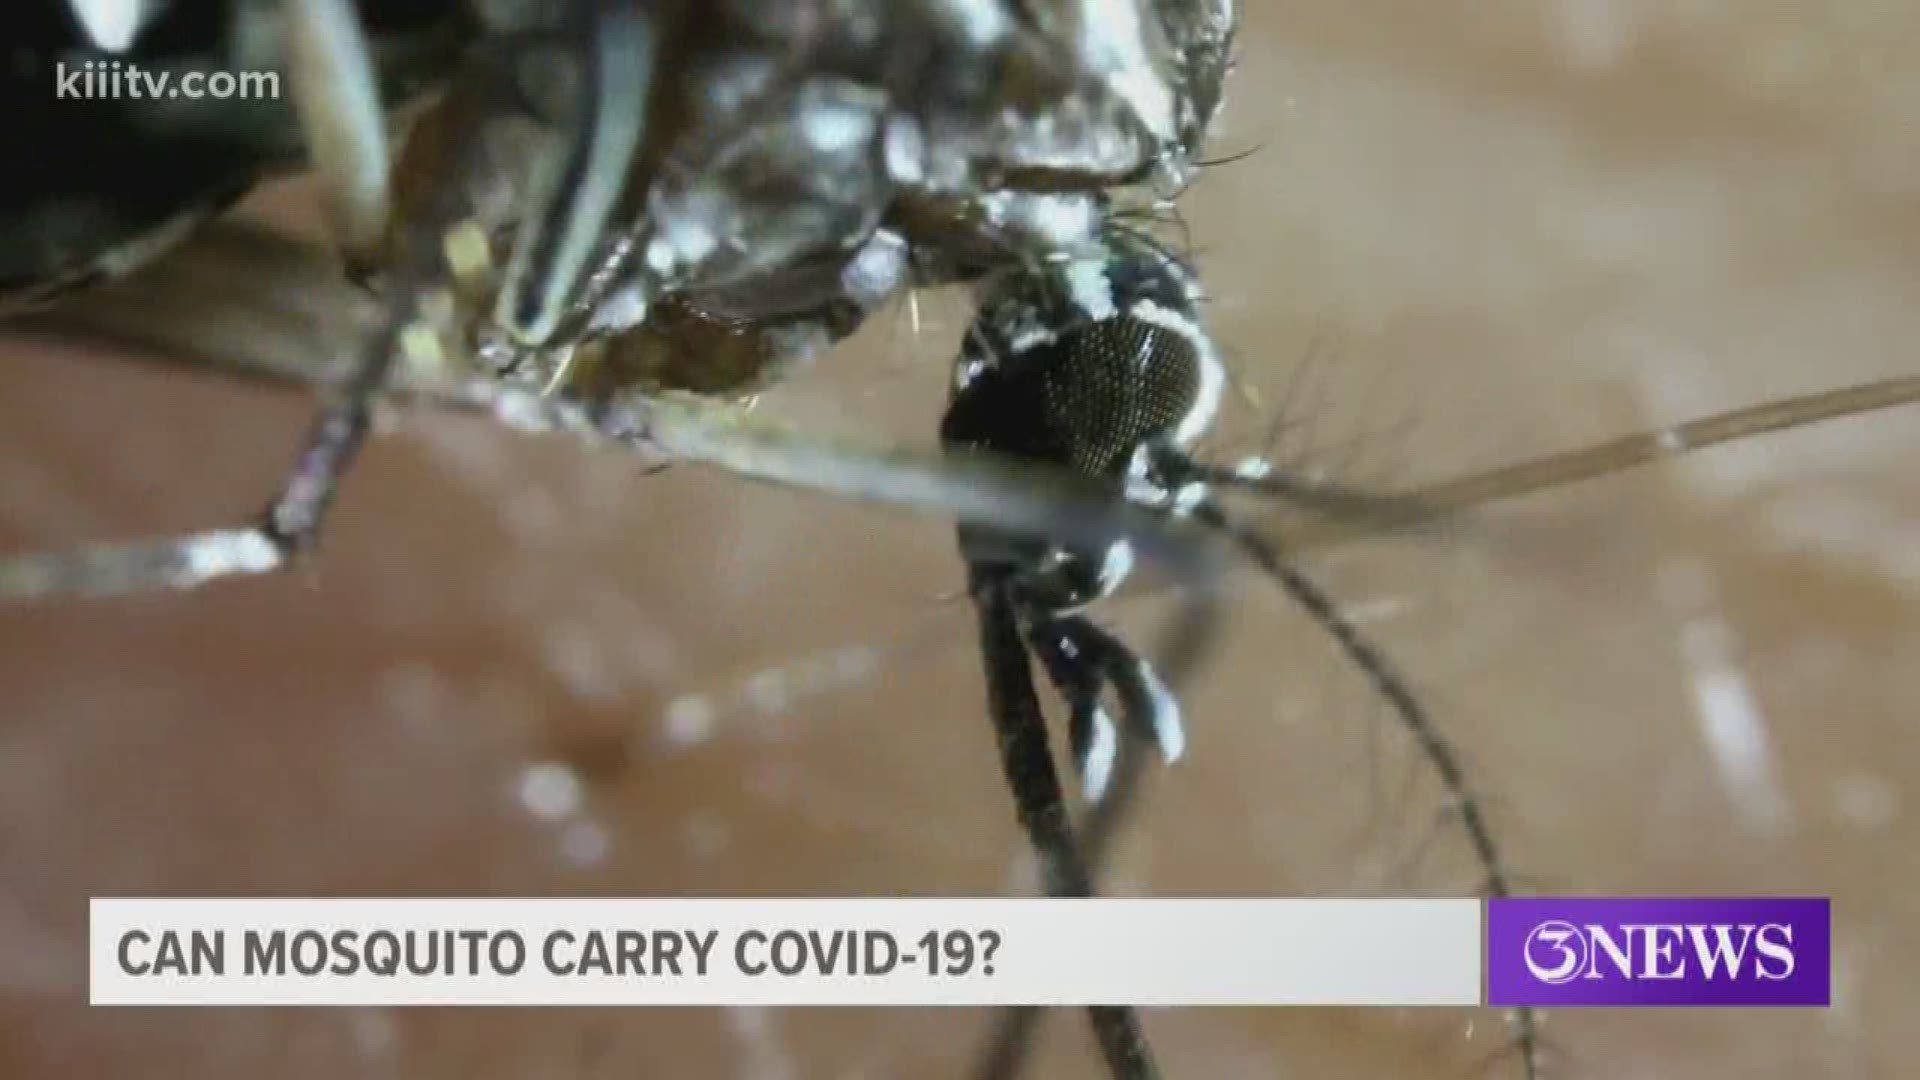 It has been suggested that mosquitoes can carry the COVID-19 coronavirus. 3News decided to look into it.